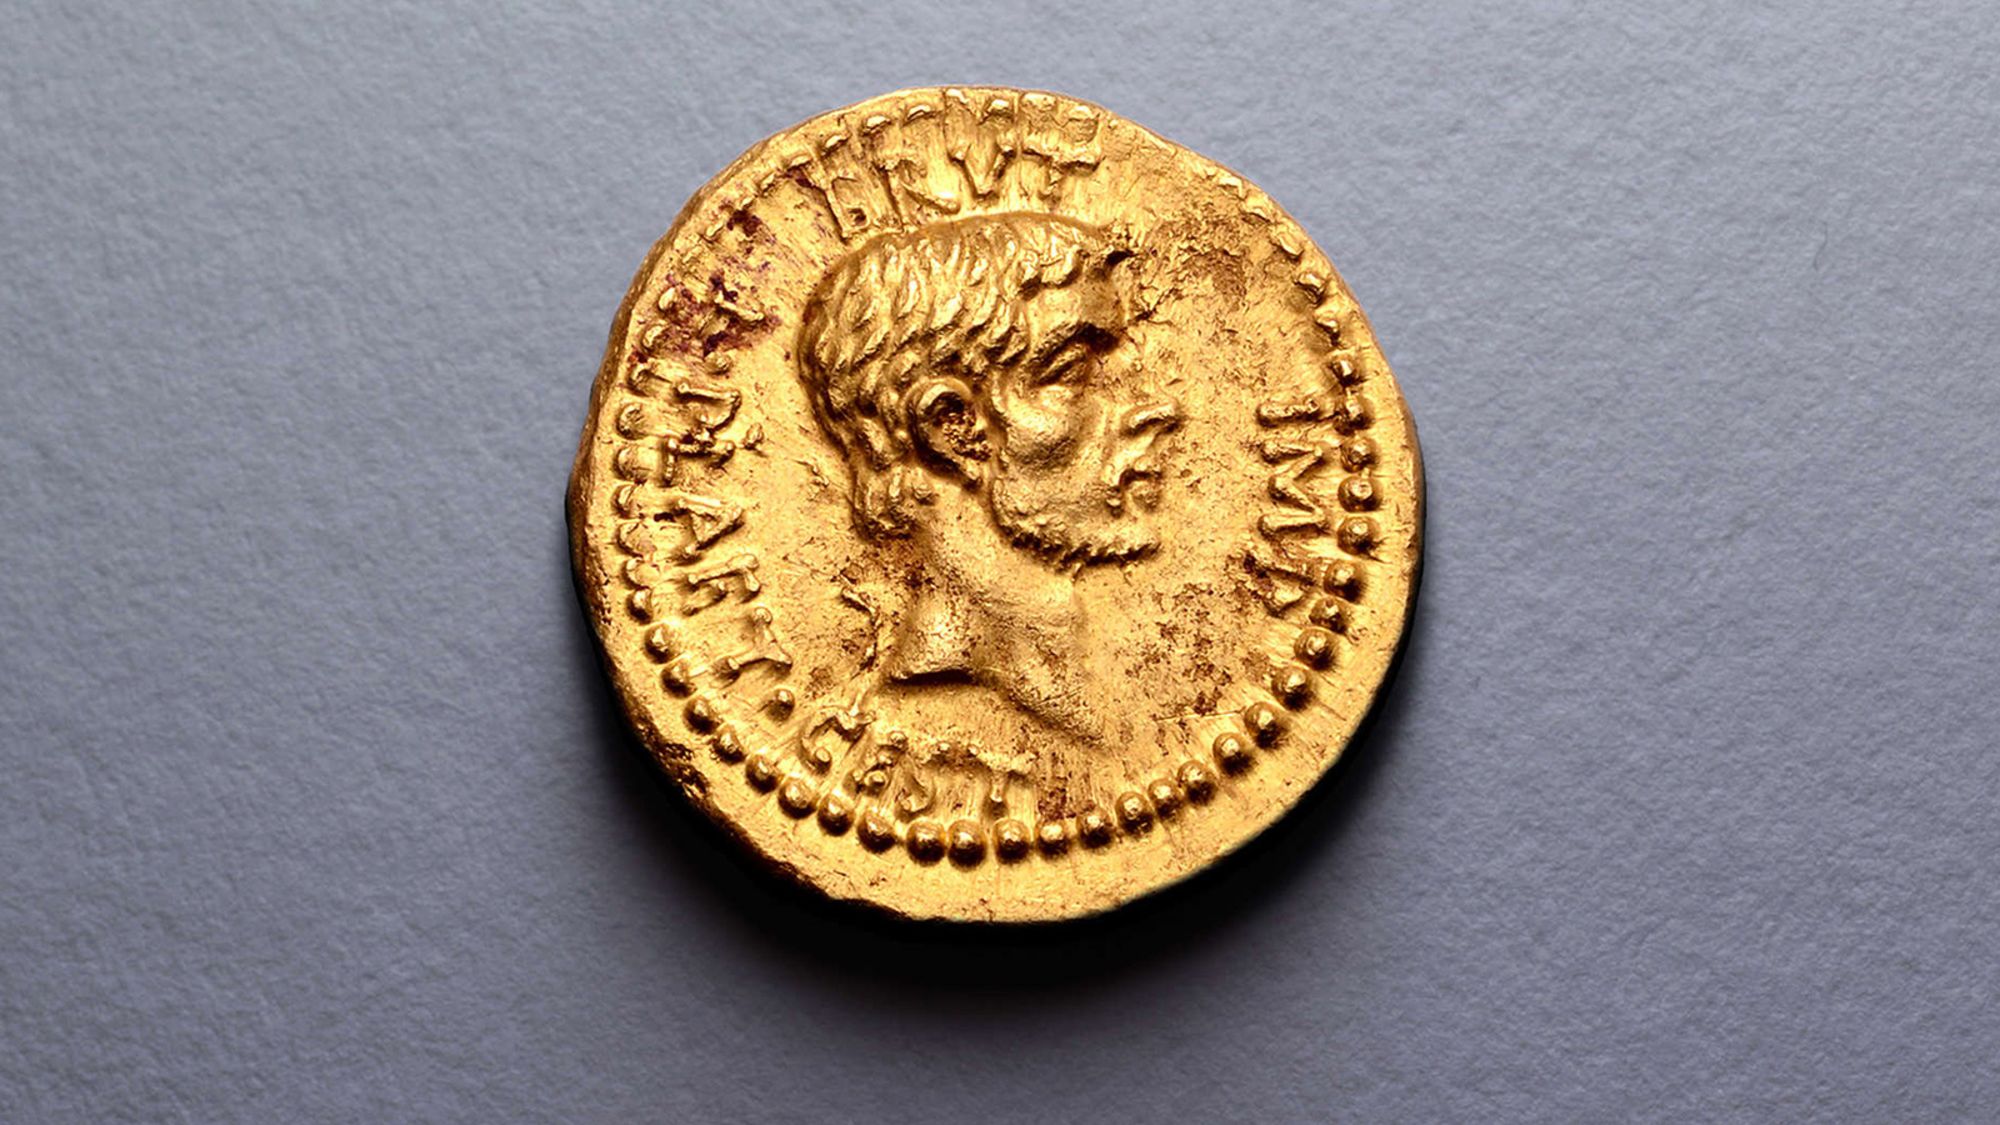 New York returns 'extraordinarily rare' gold coin to Greece — after it set  auction record for $3.5 million